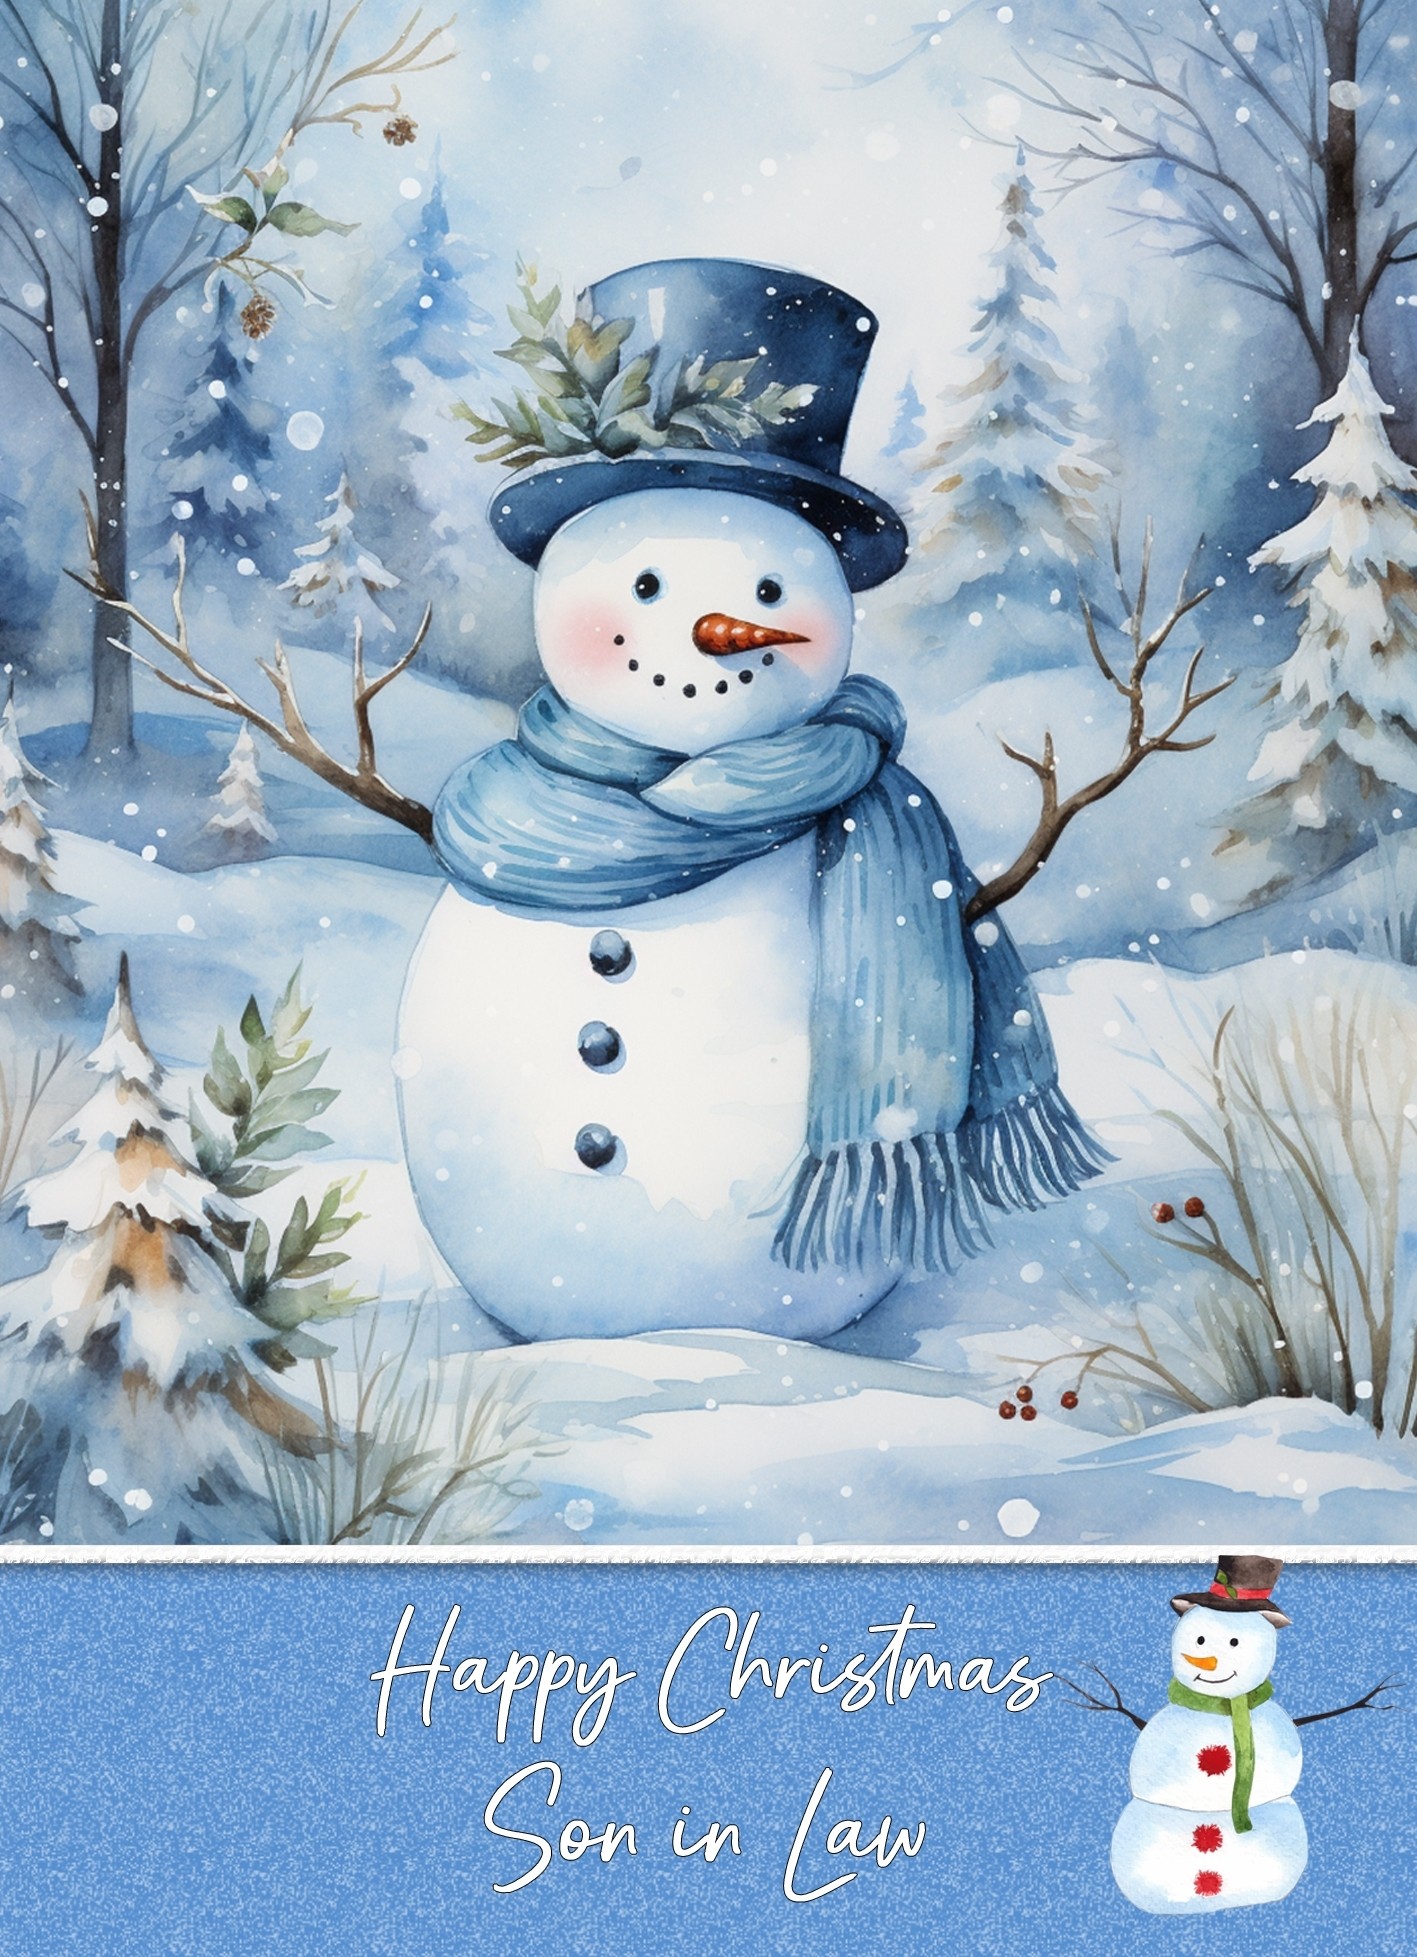 Christmas Card For Son in Law (Snowman, Design 8)